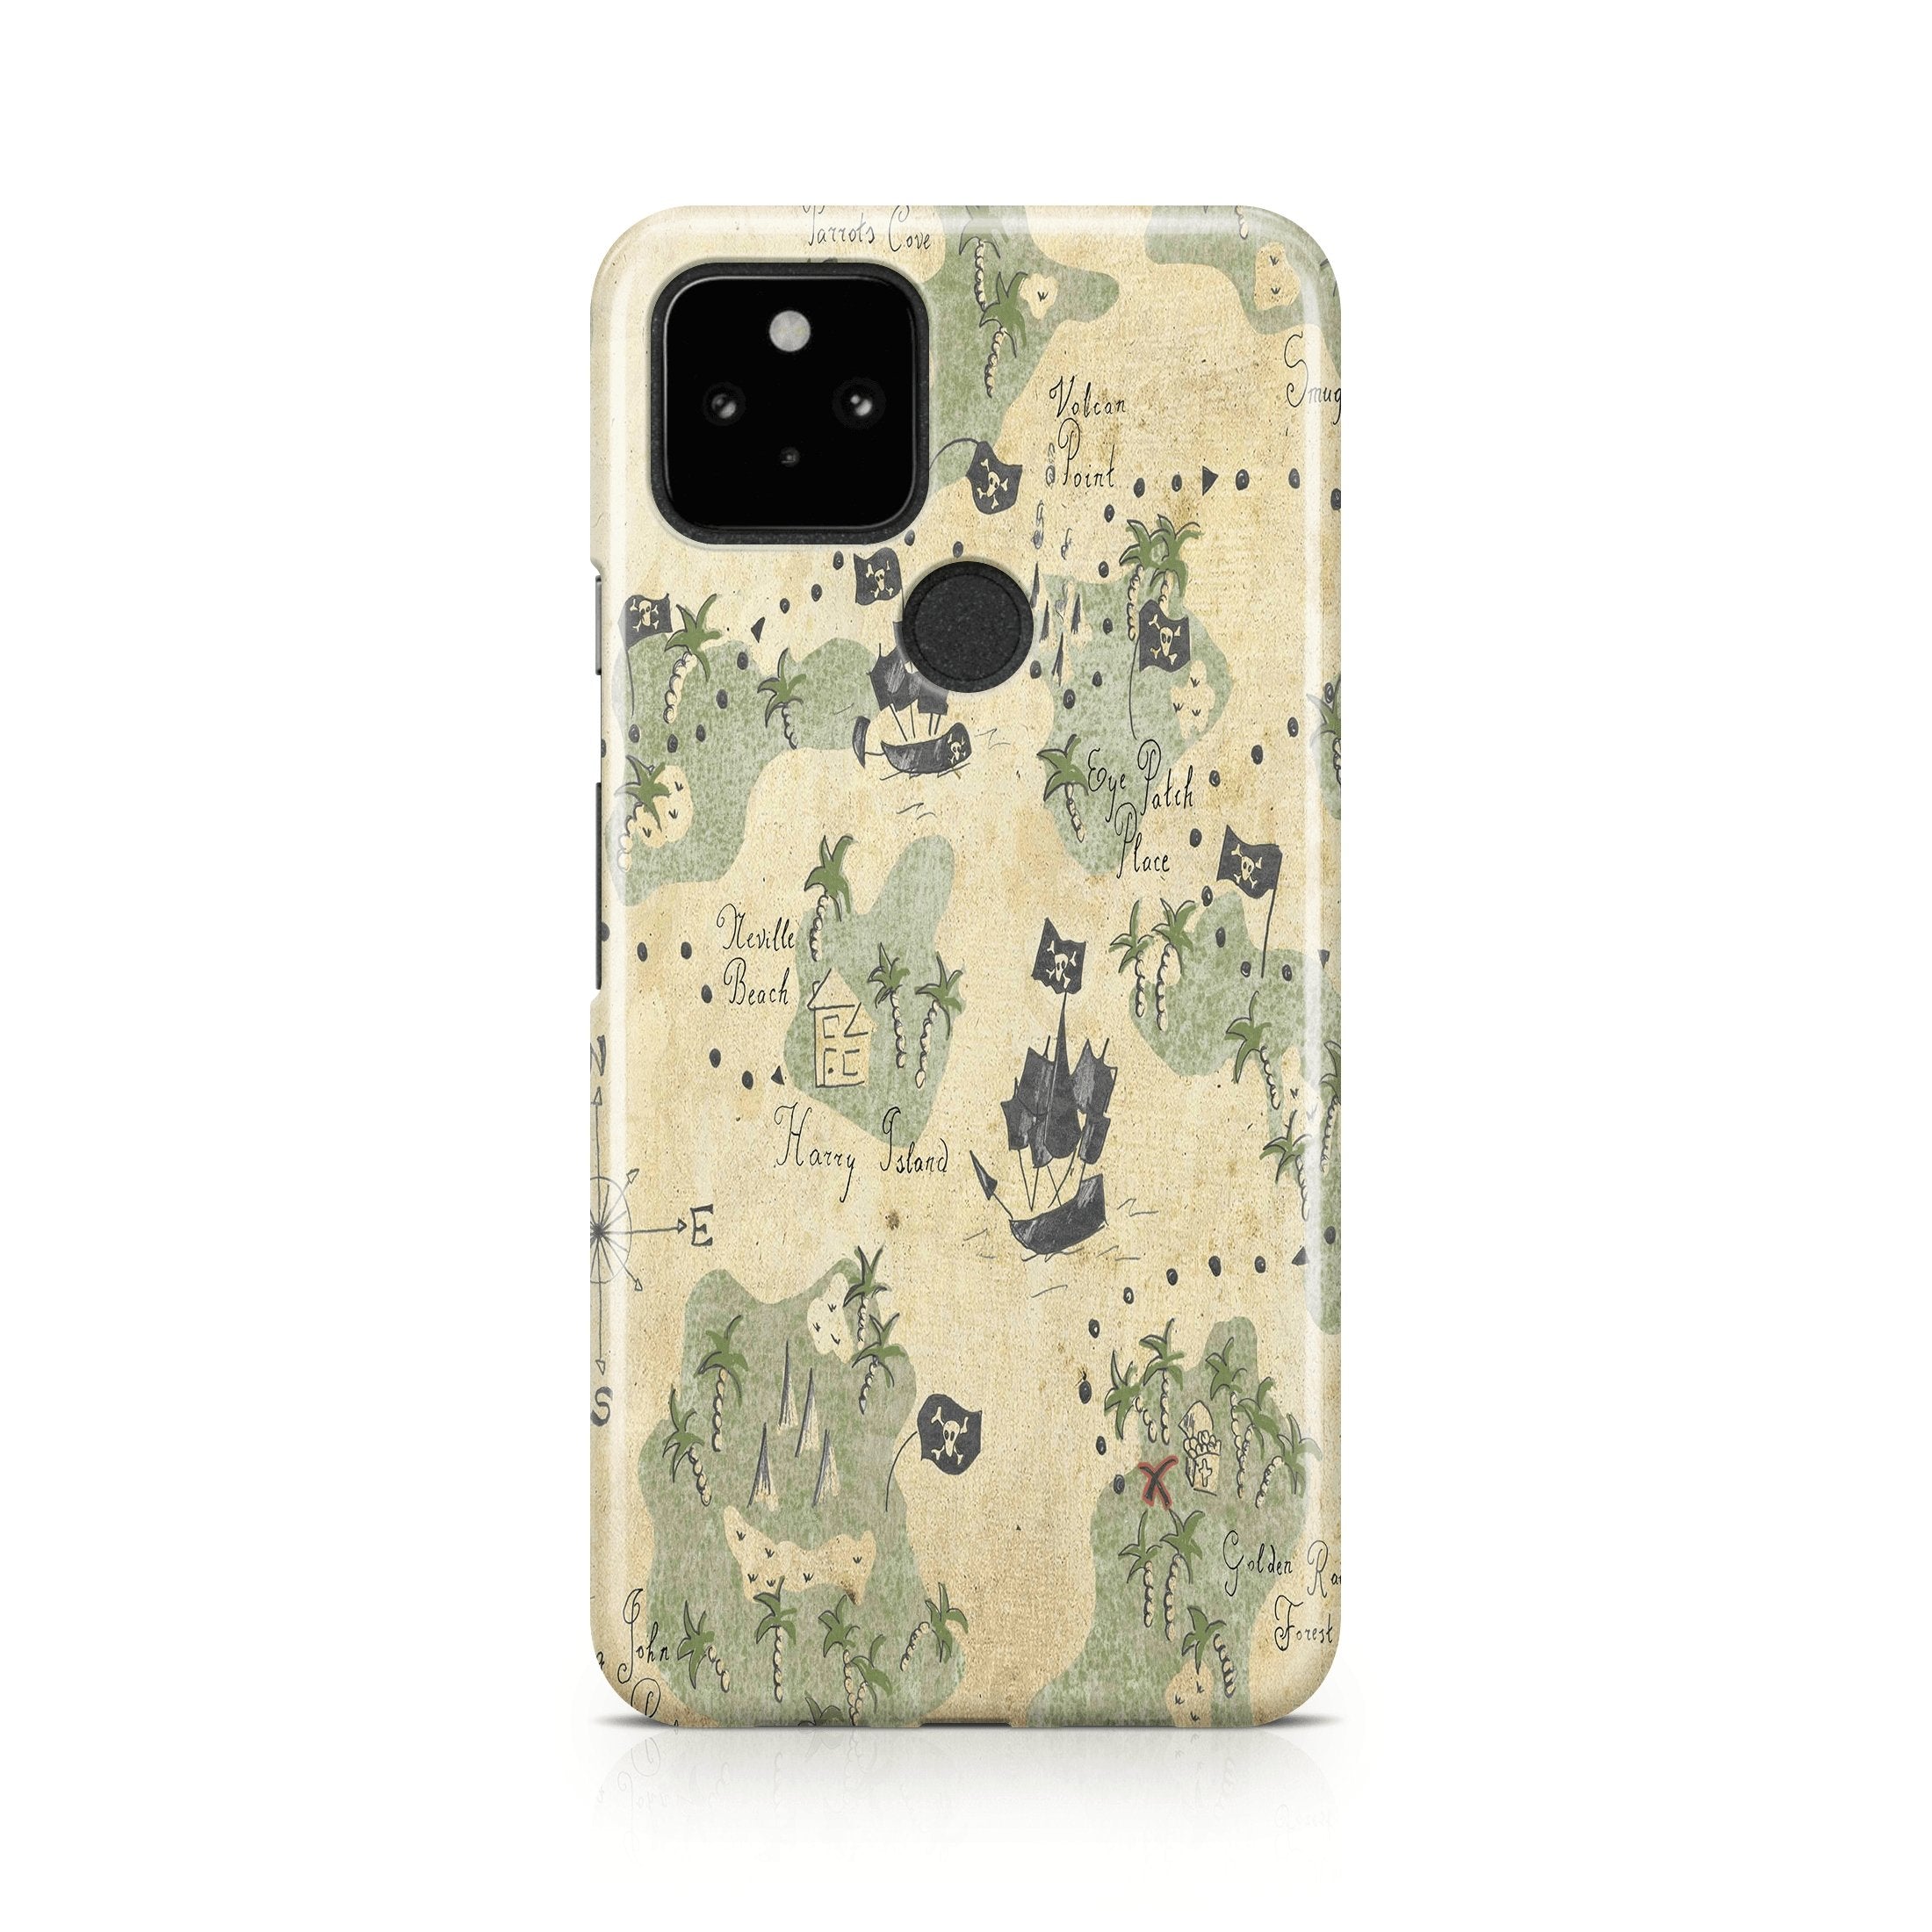 Pirate Map - Google phone case designs by CaseSwagger